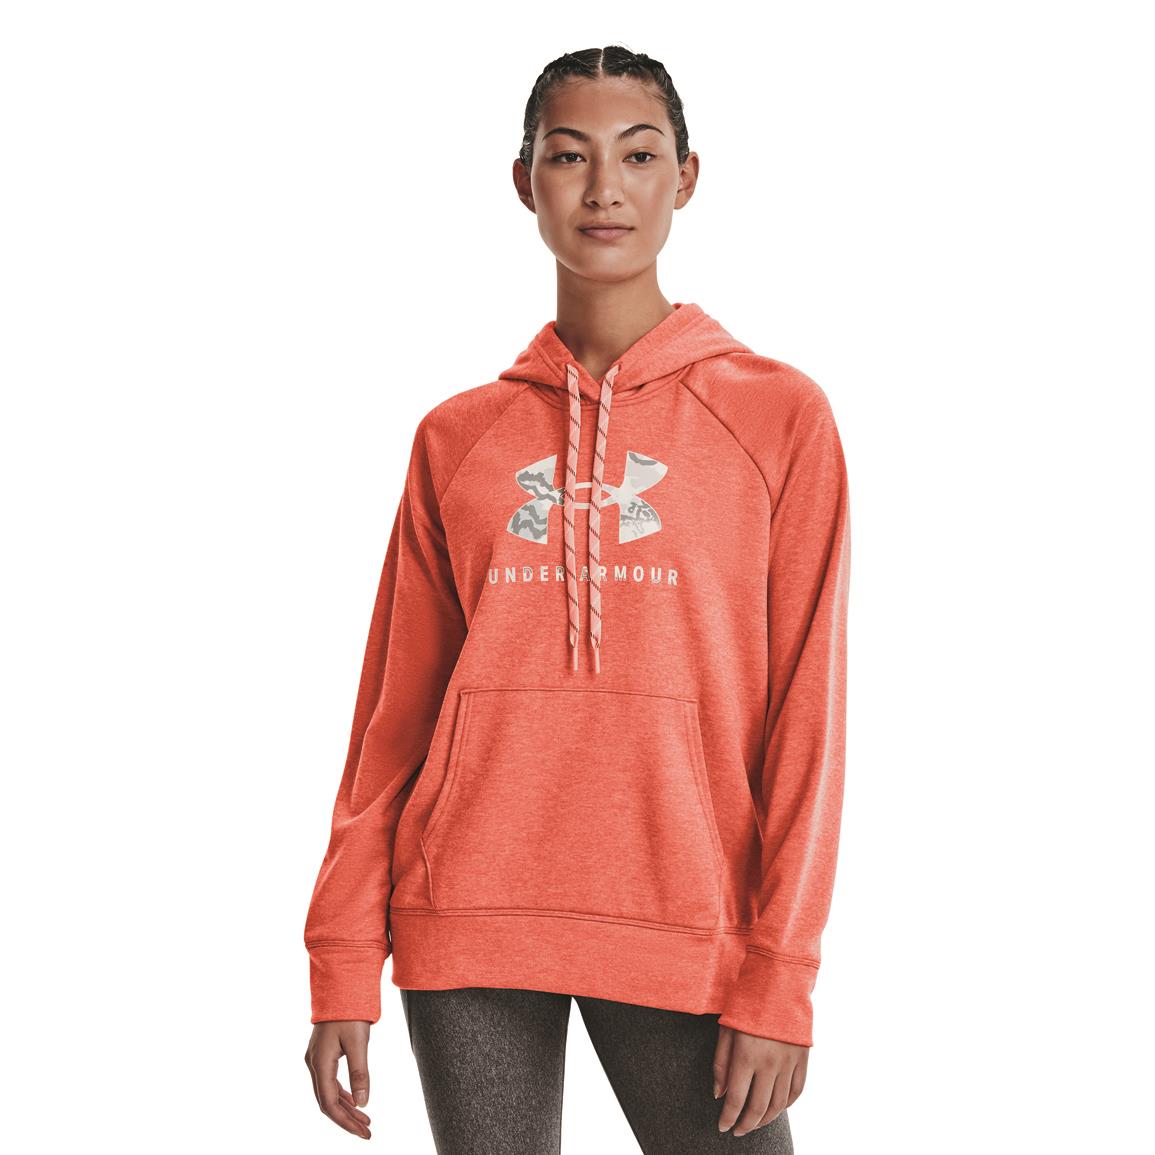 Lightweight, breathable 80/20 cotton/polyester French terry fleece, Electric Tangerine/ua Snow Camo